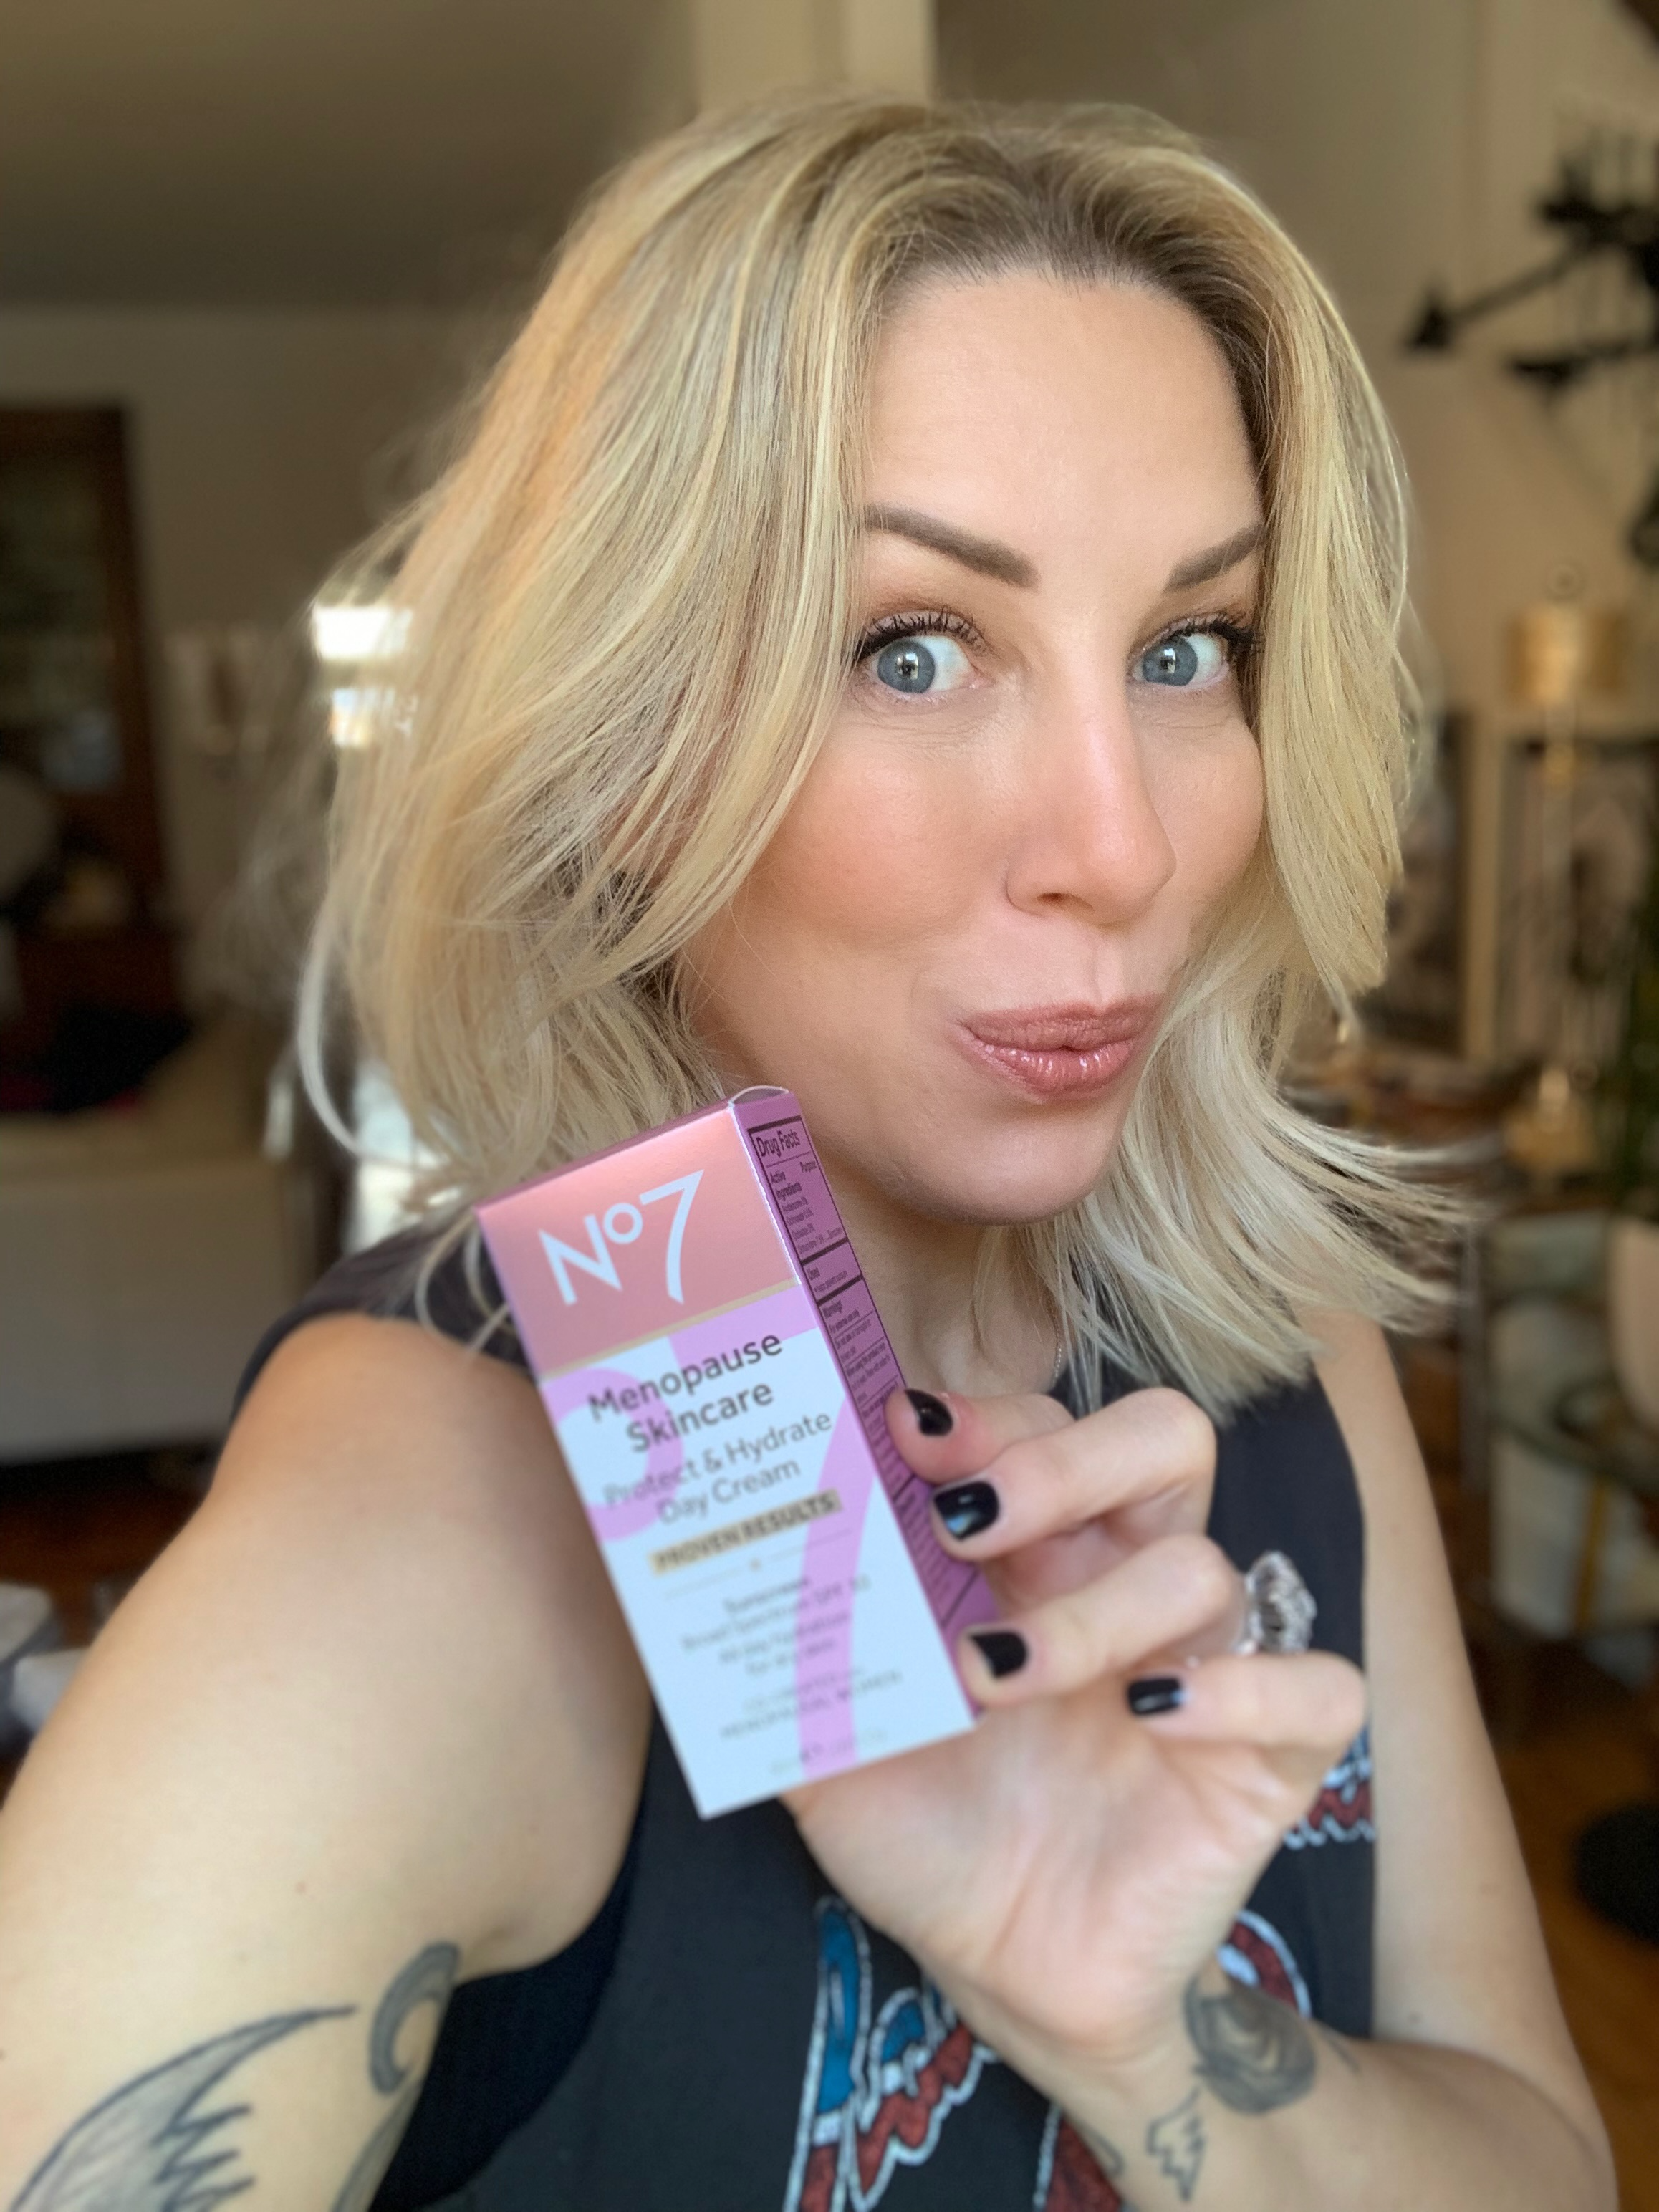 Lauria holding a No7 Menopause product